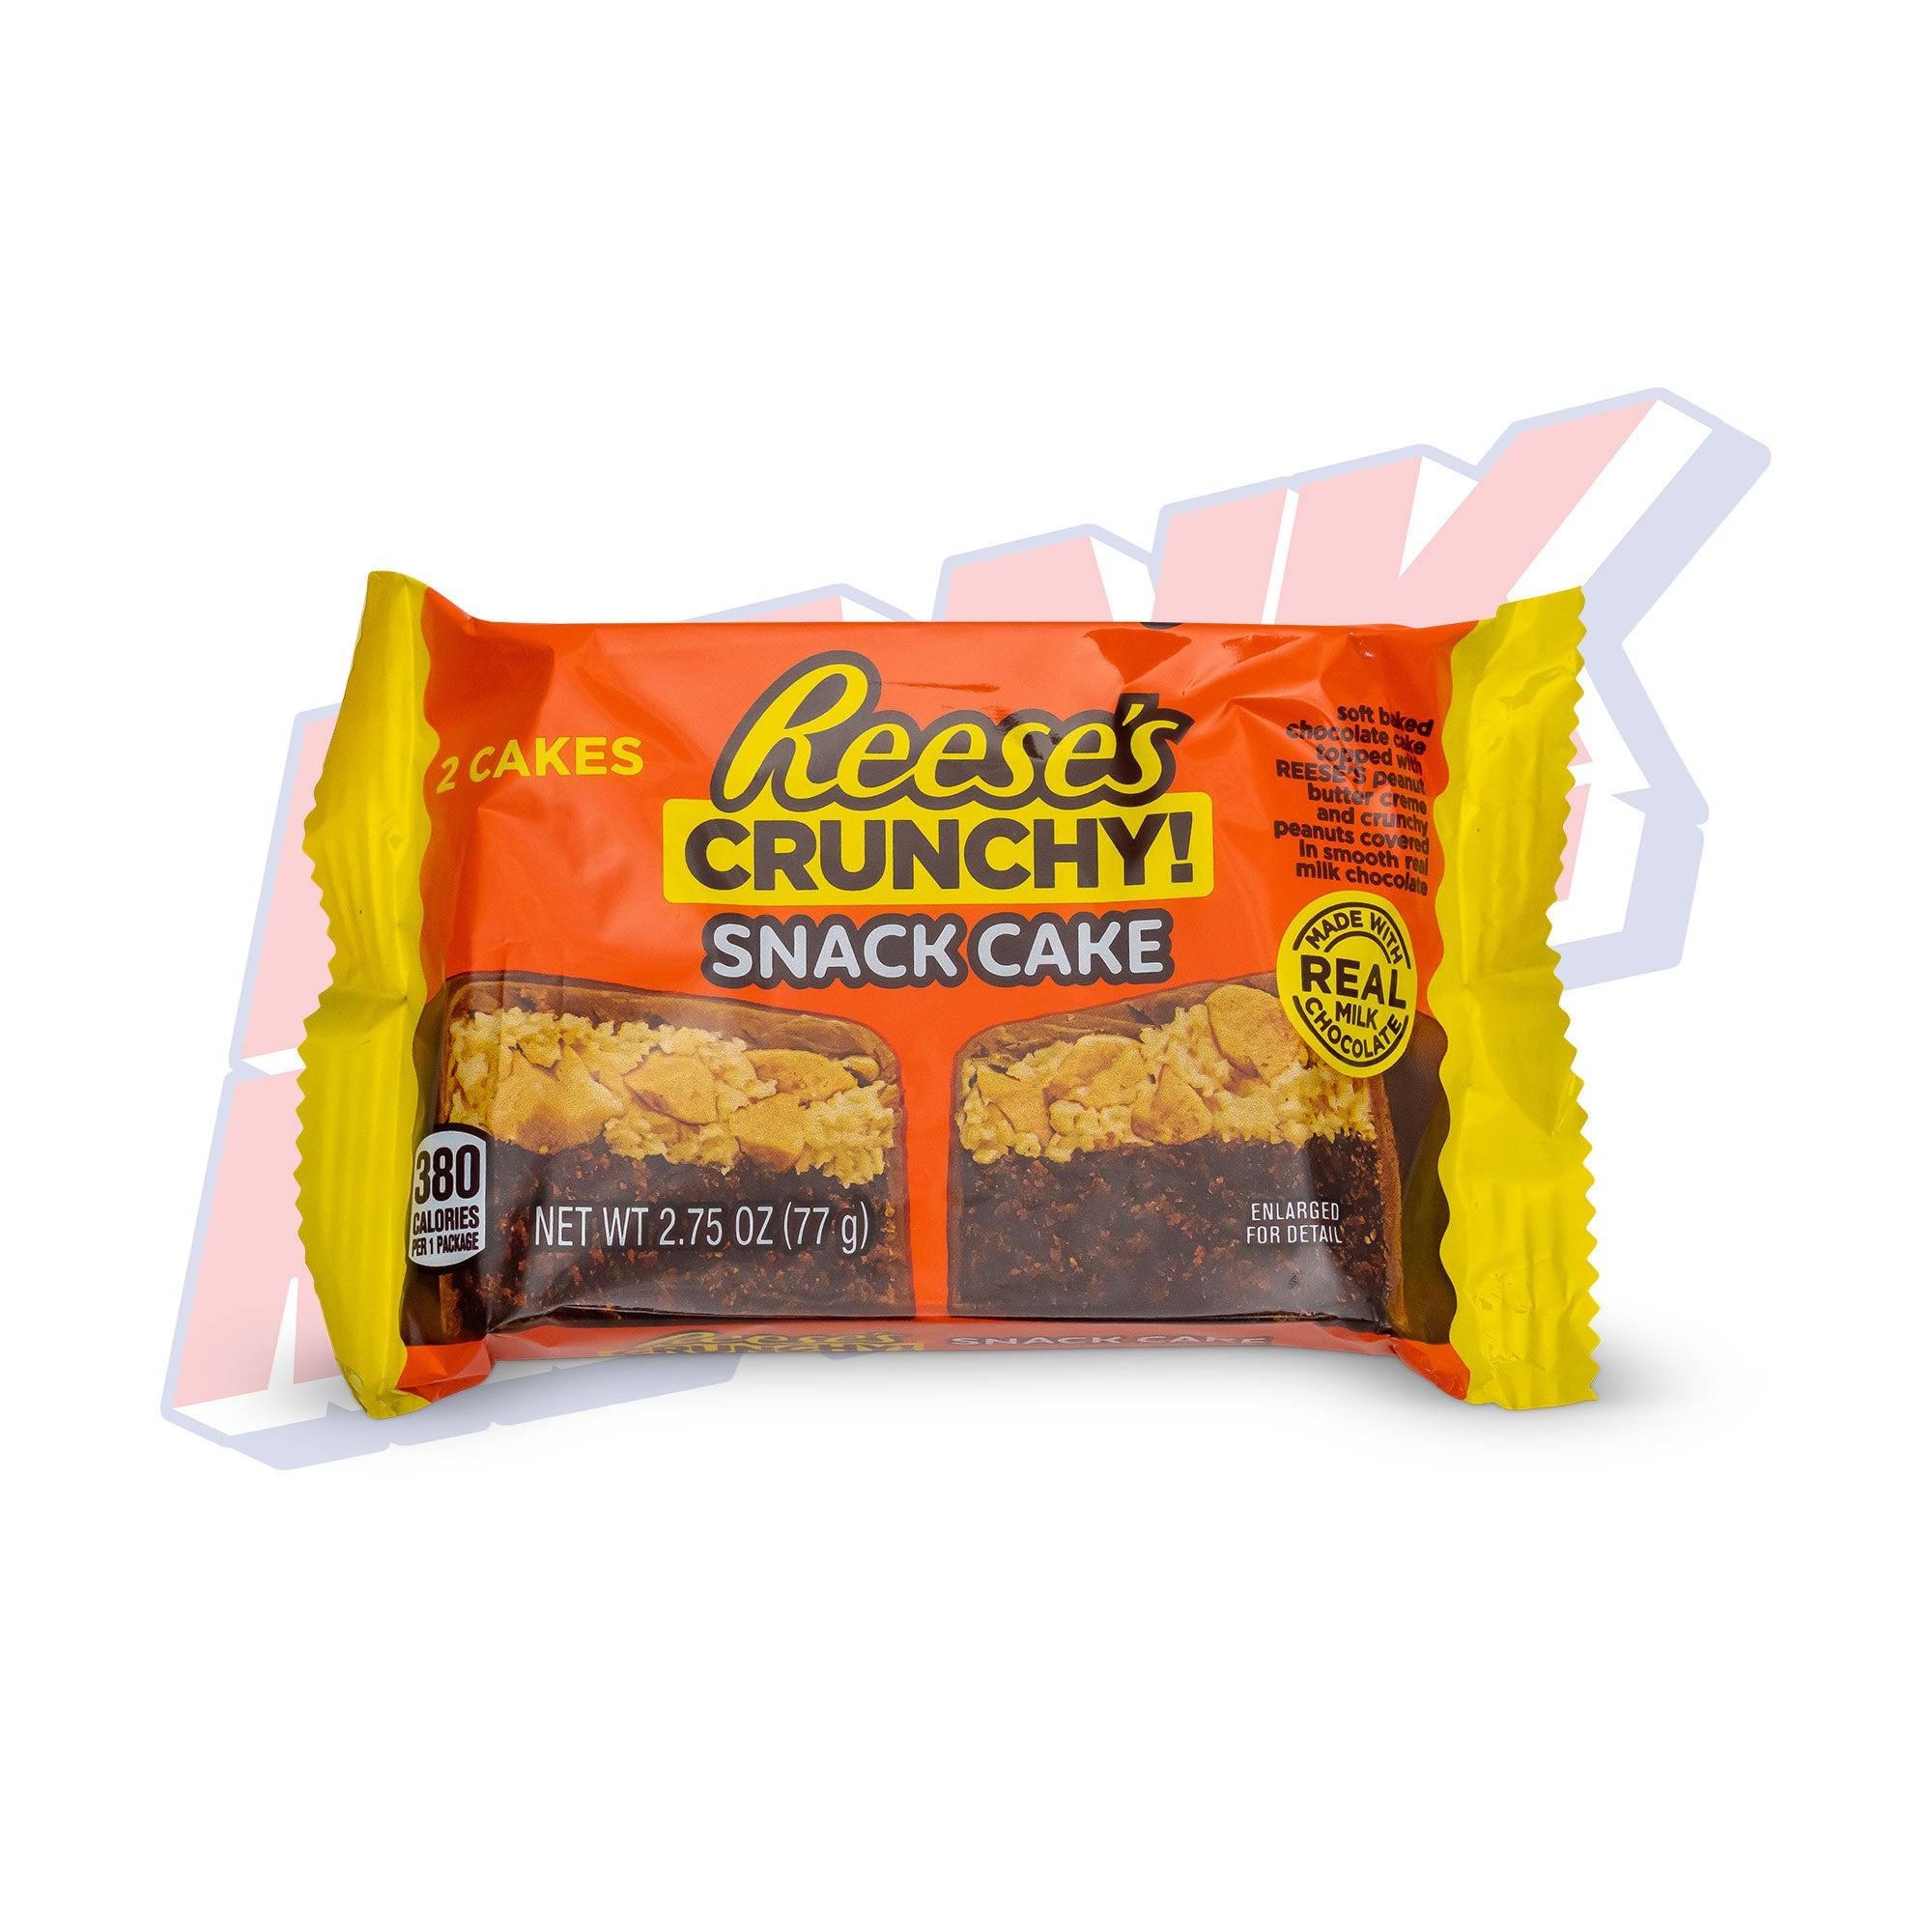 Reese's Crunchy Snack Cakes - 2.86oz